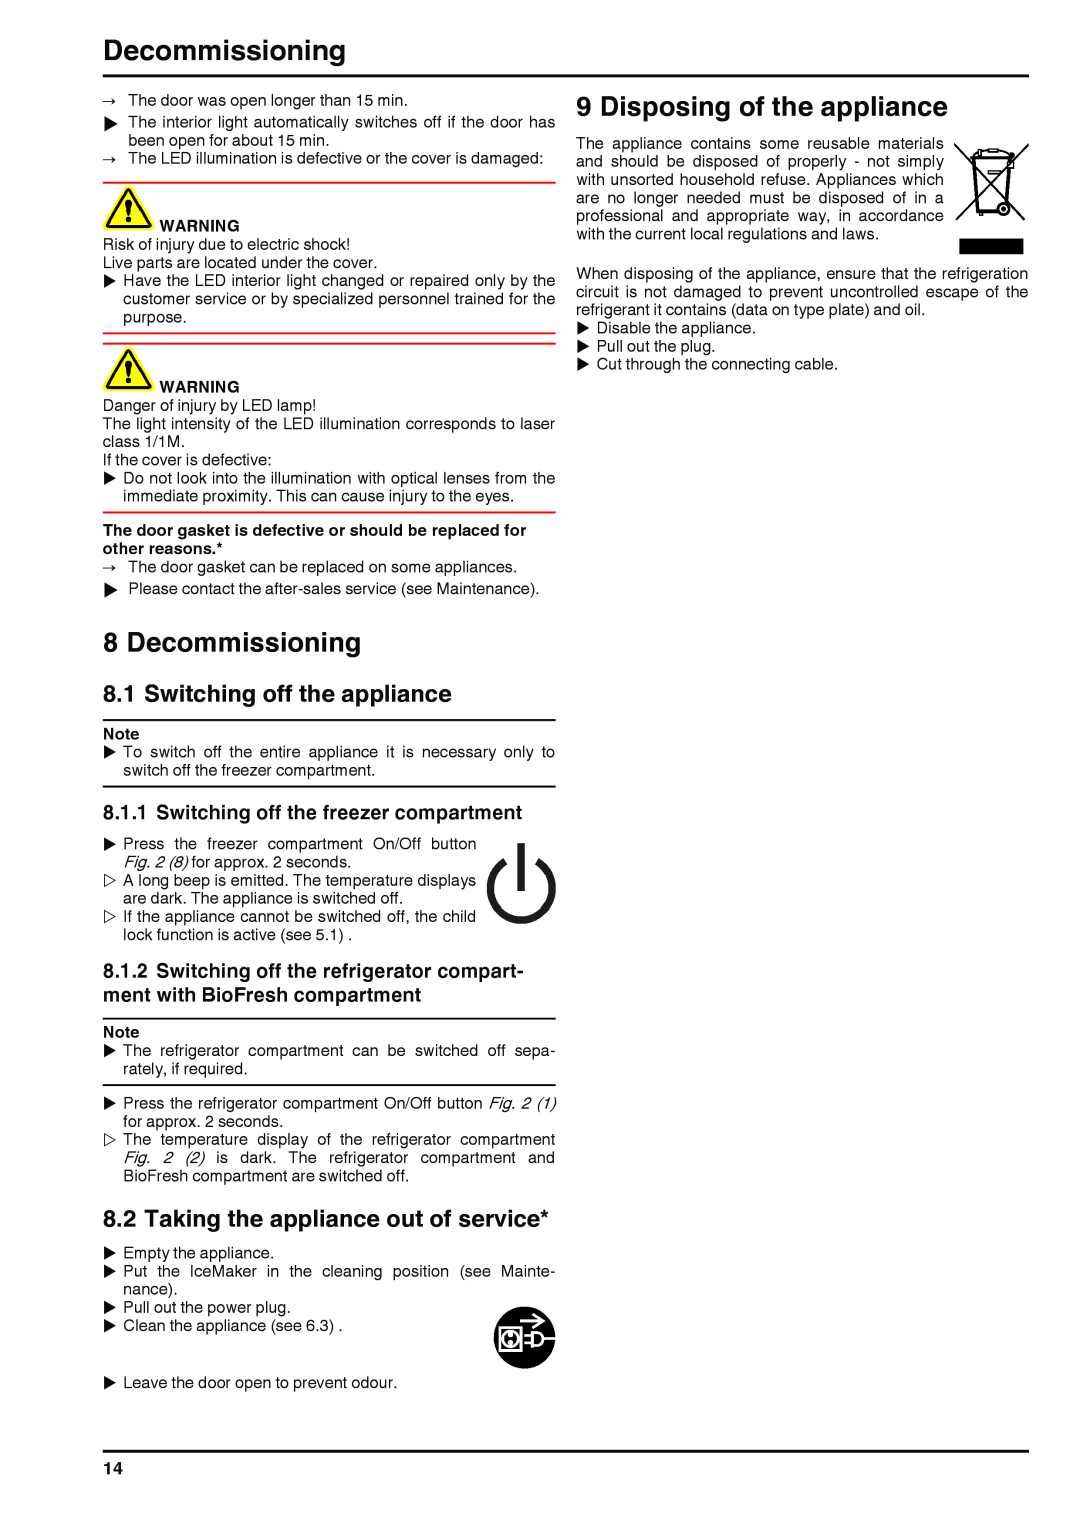 Liebherr 180613 7085462-00 manual Decommissioning, Disposing of the appliance, Switching off the appliance 